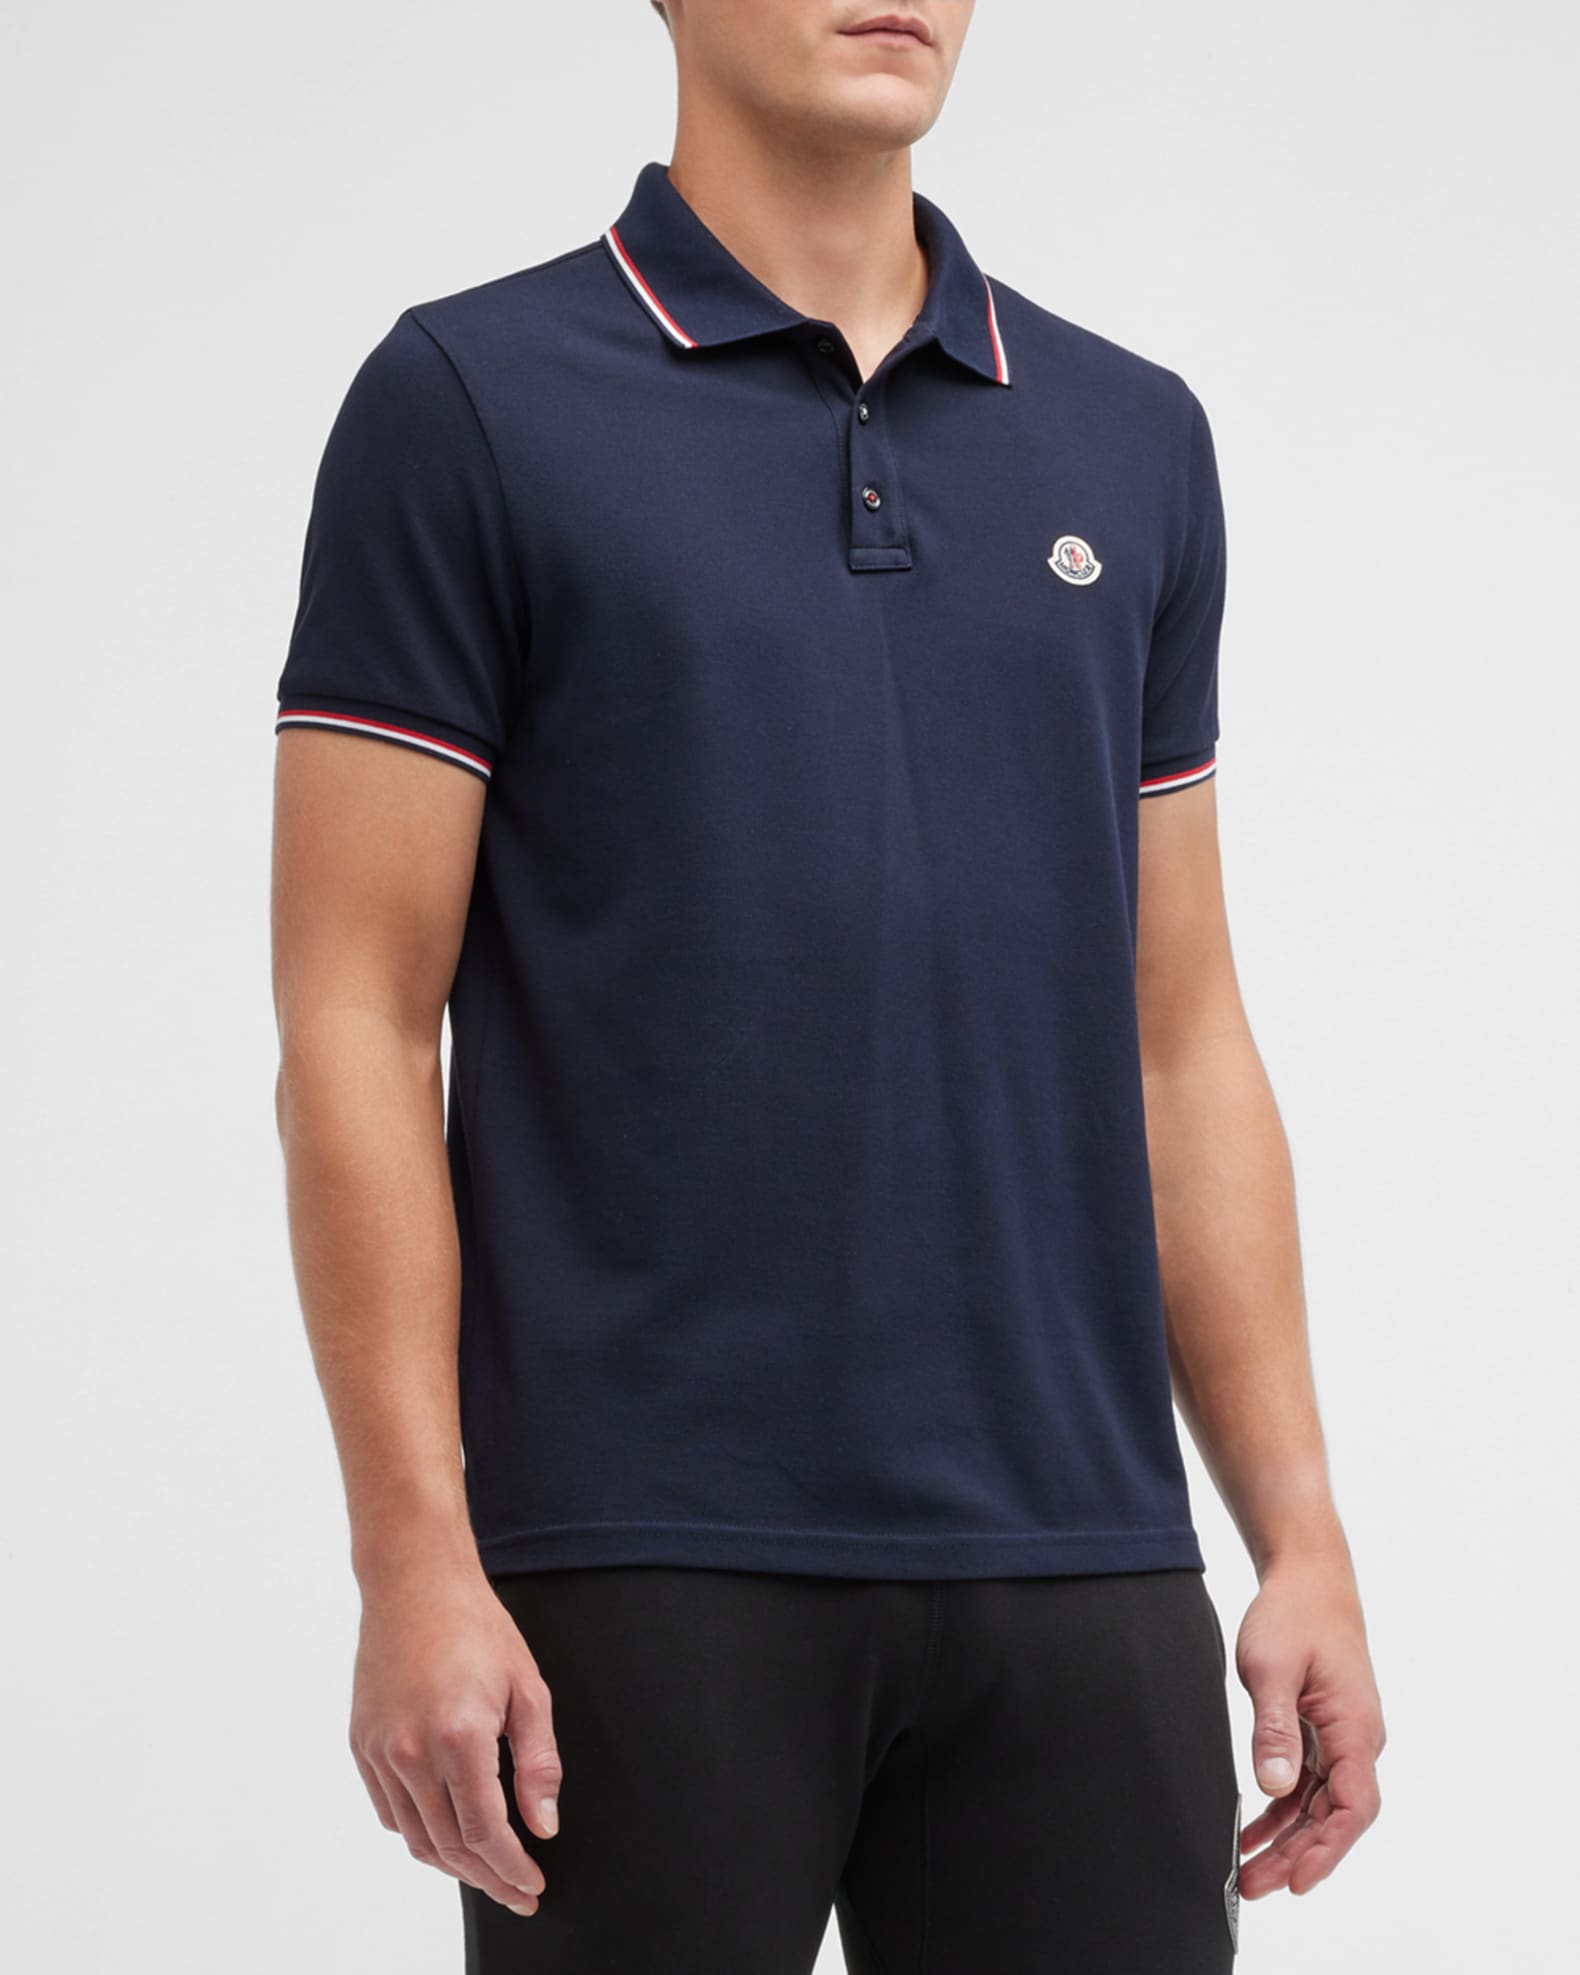 intelligence Canoe Contract Moncler Men's Tipped Polo Shirt | Neiman Marcus